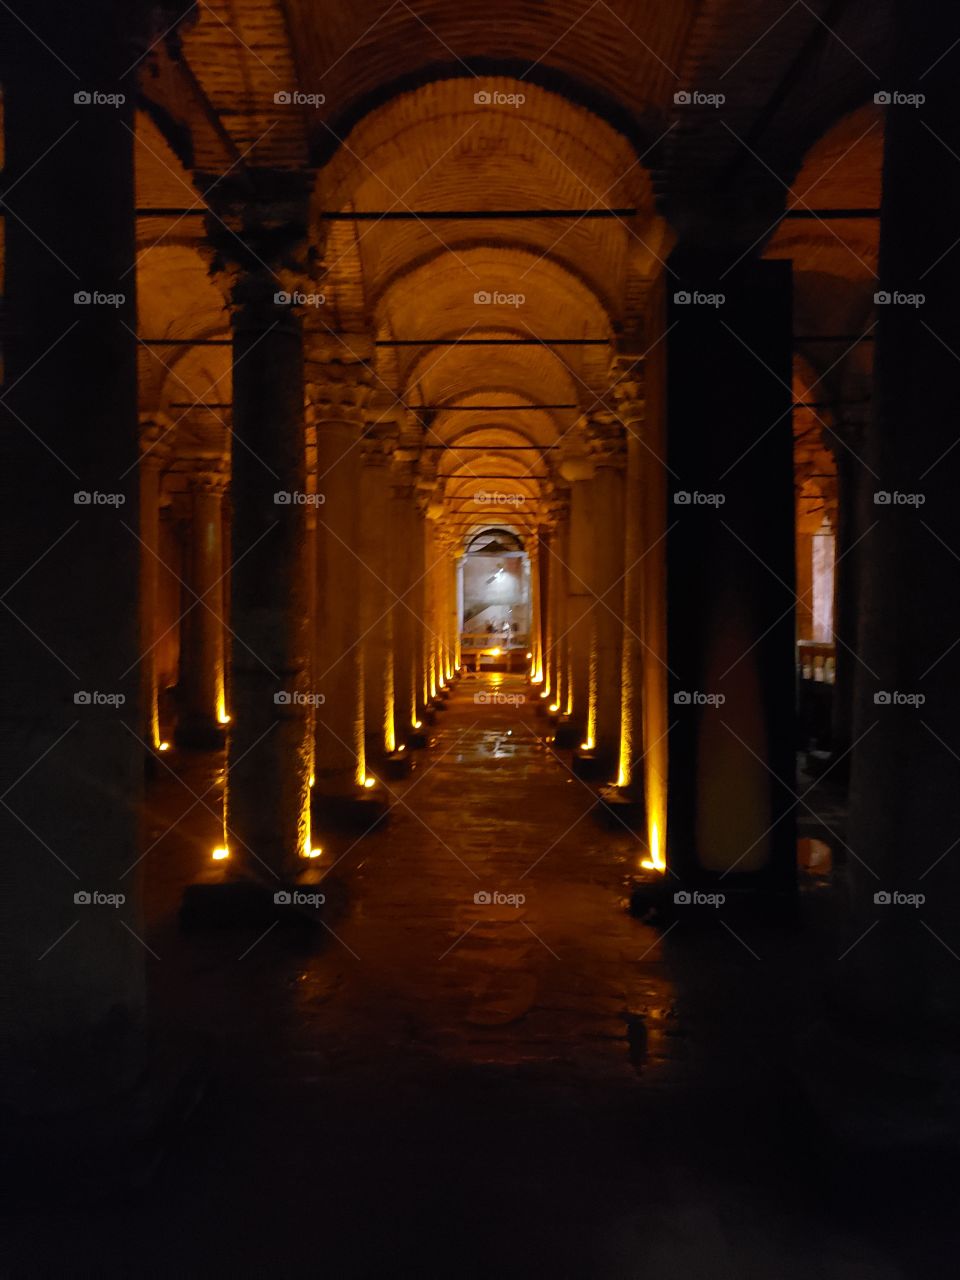 The Basilica Cistern in the depths of history. Istanbul, Turkey